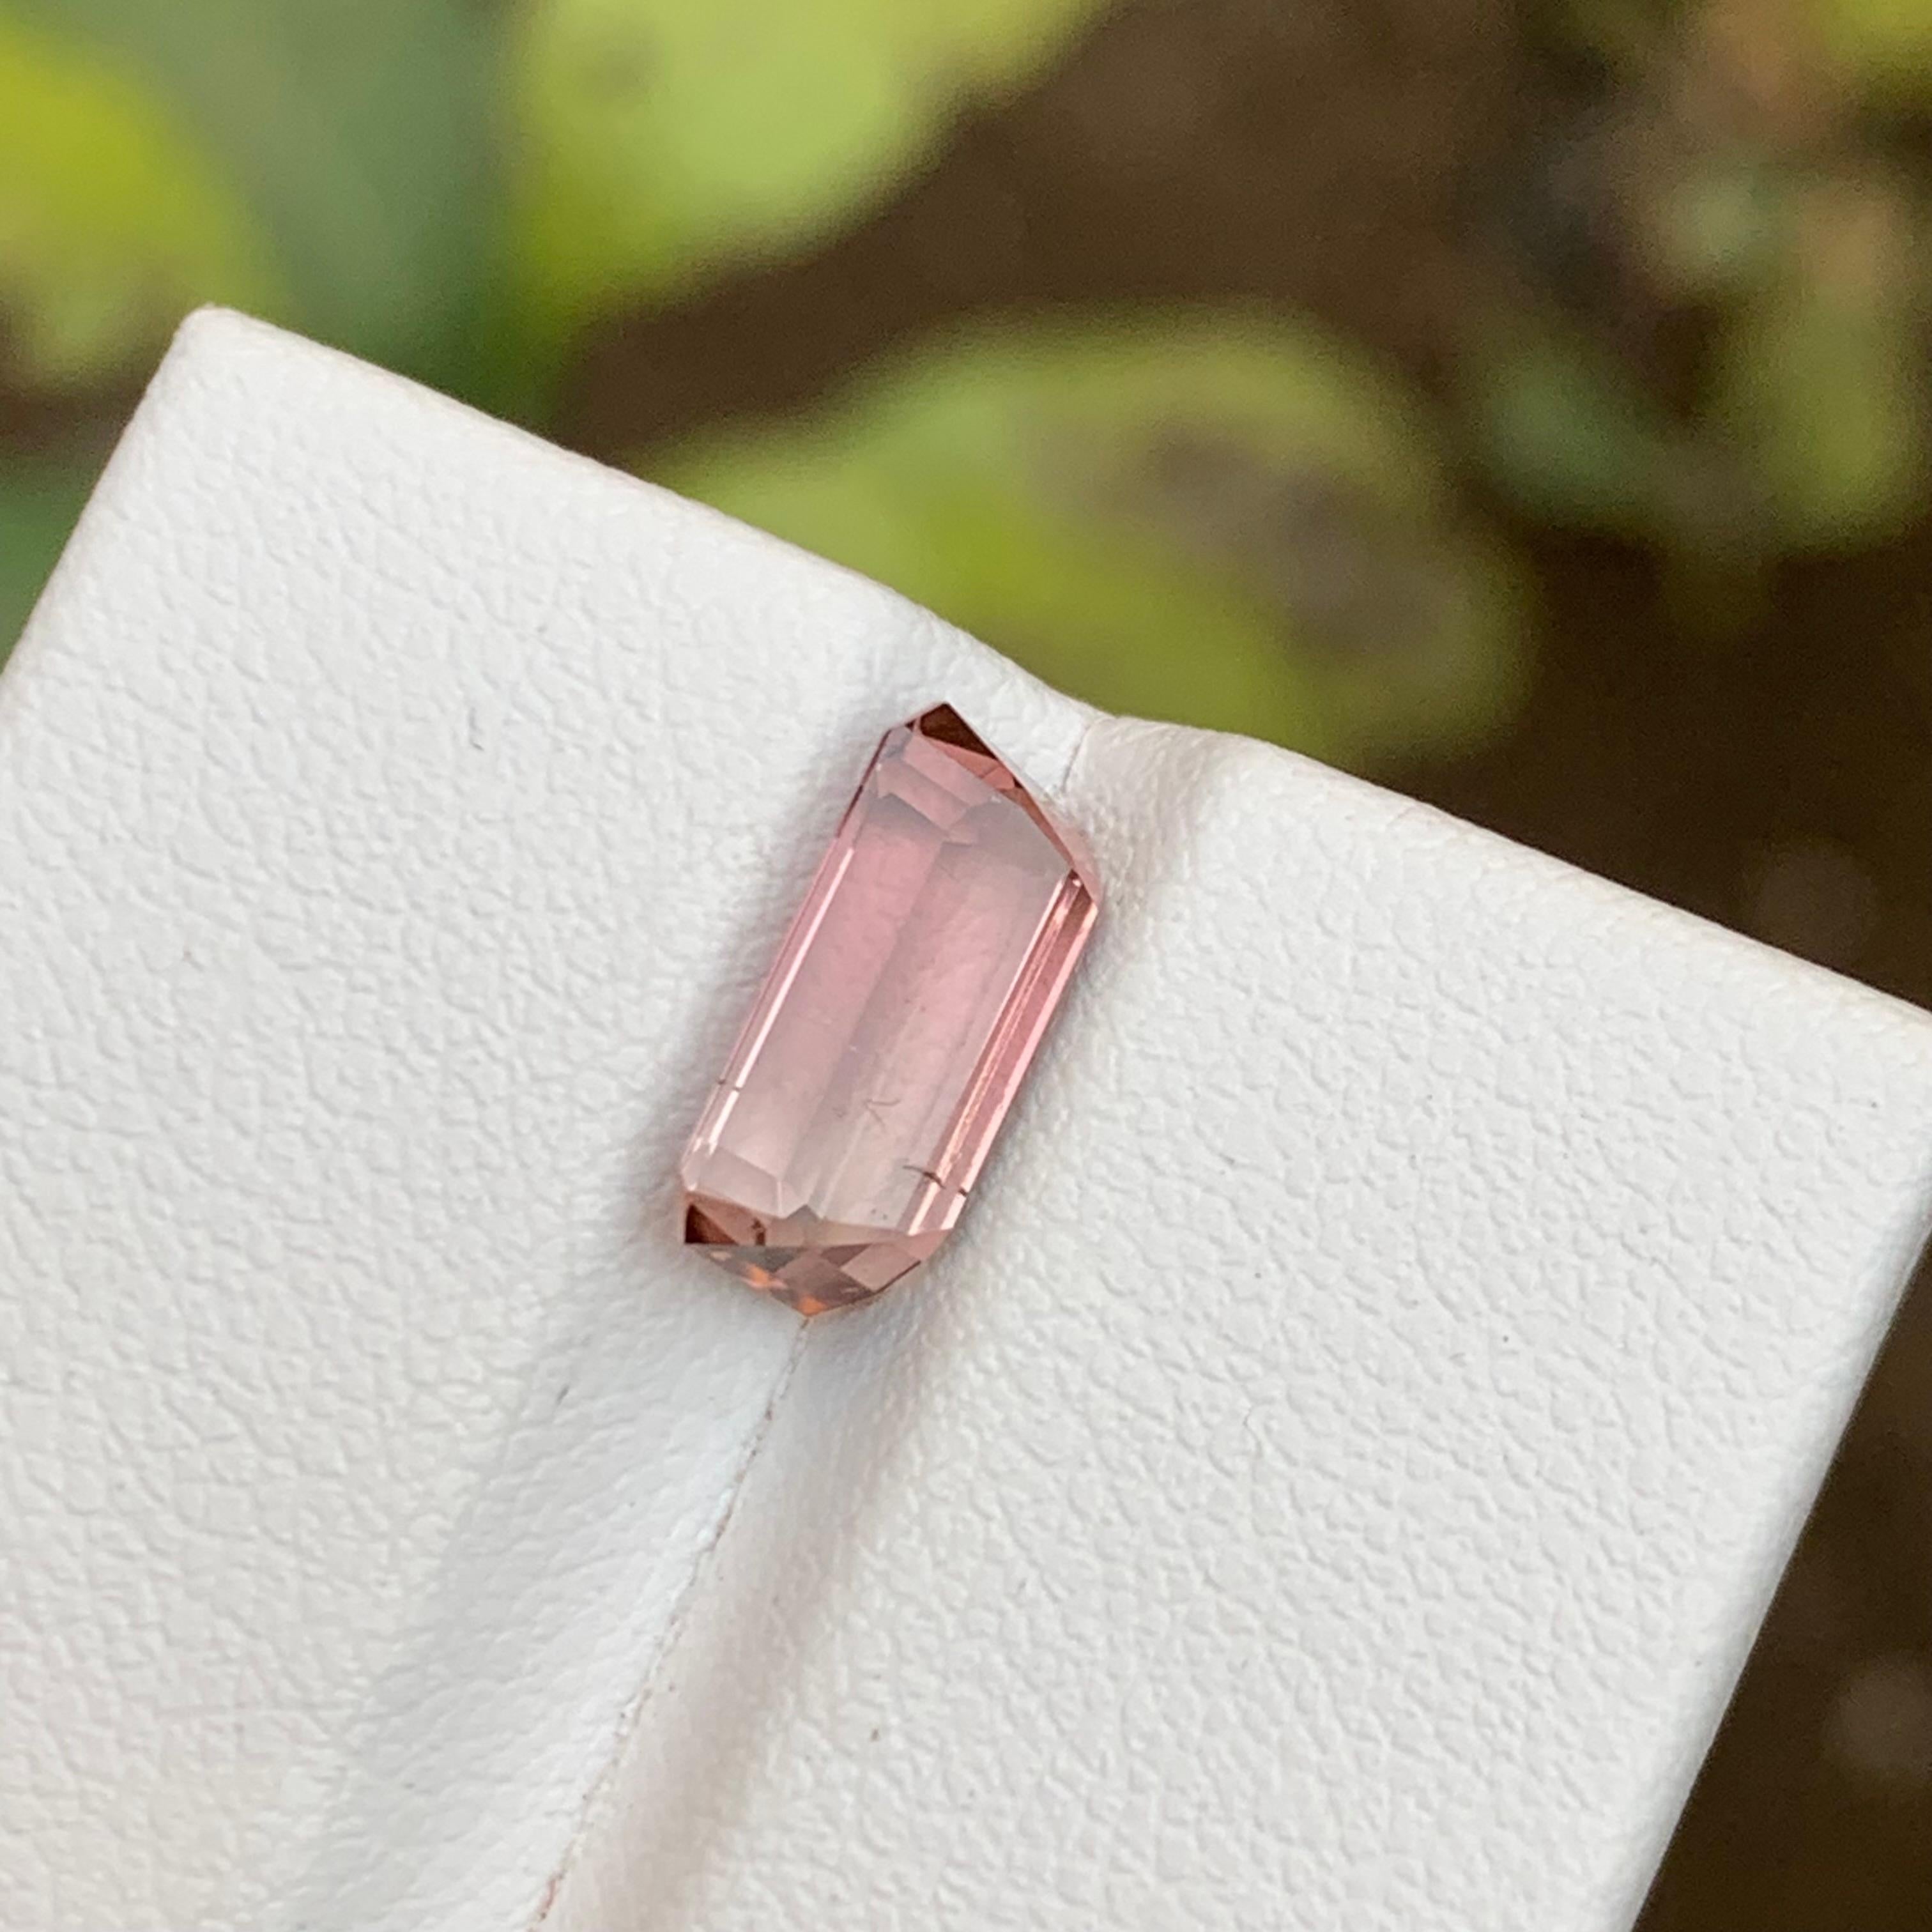 Rare Pink Natural Tourmaline Loose Gemstone 2.45 Ct Emerald Cut for Ring/Pendant For Sale 4